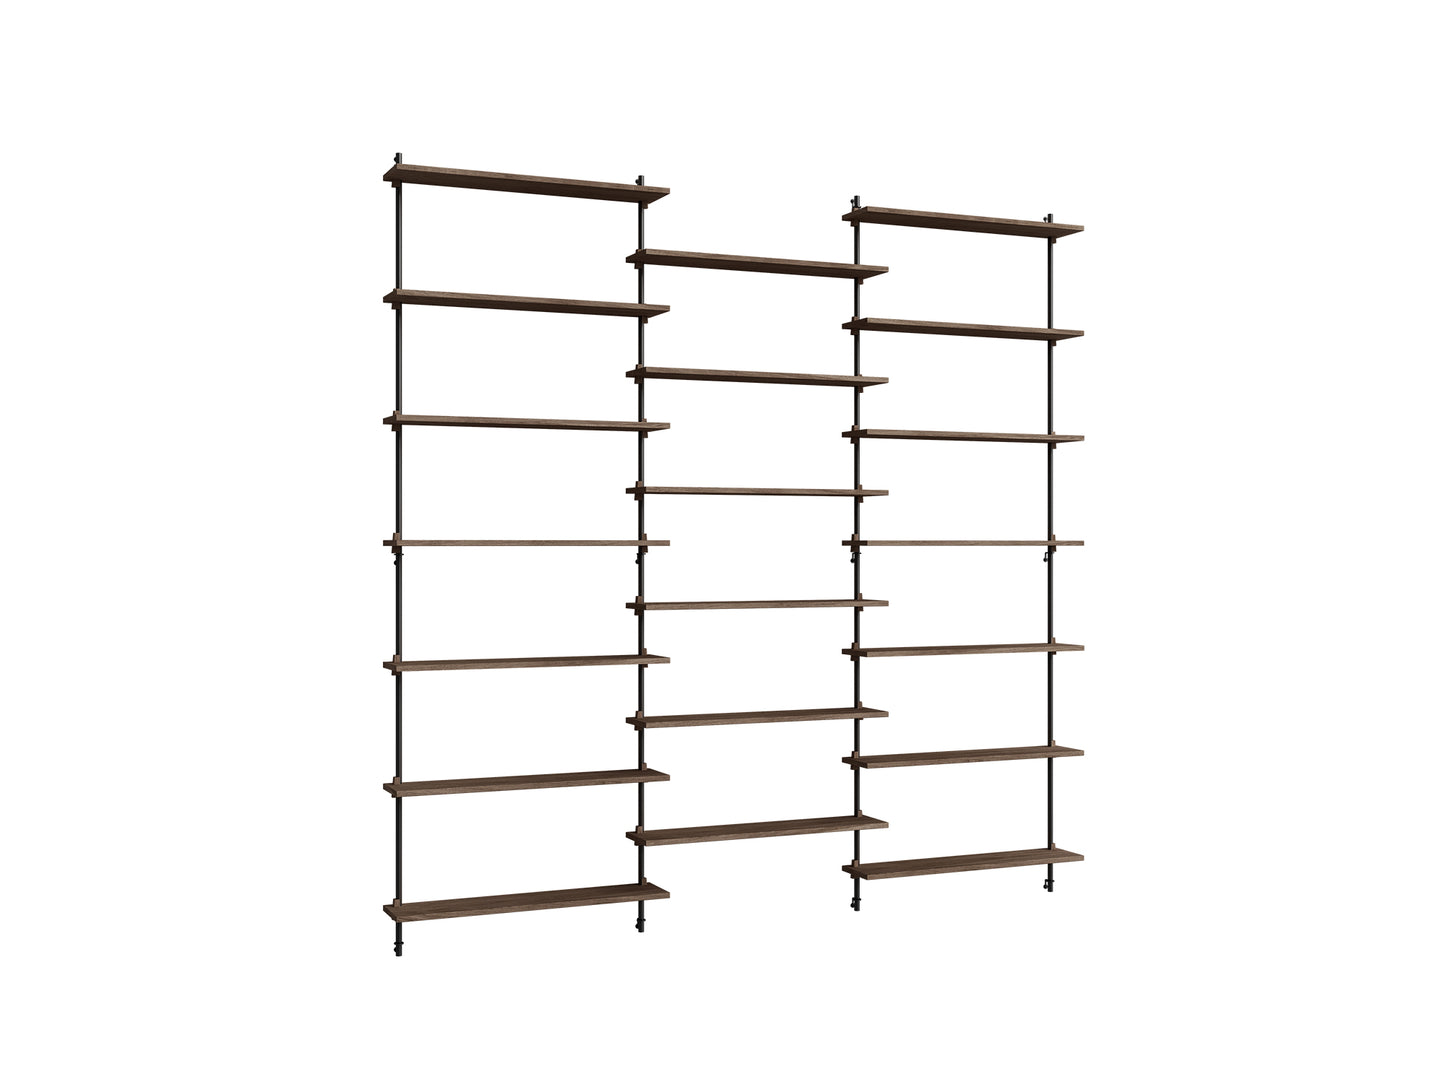 Wall Shelving System Sets (230 cm) by Moebe - WS.230.3 / Black Uprights / Smoked Oak